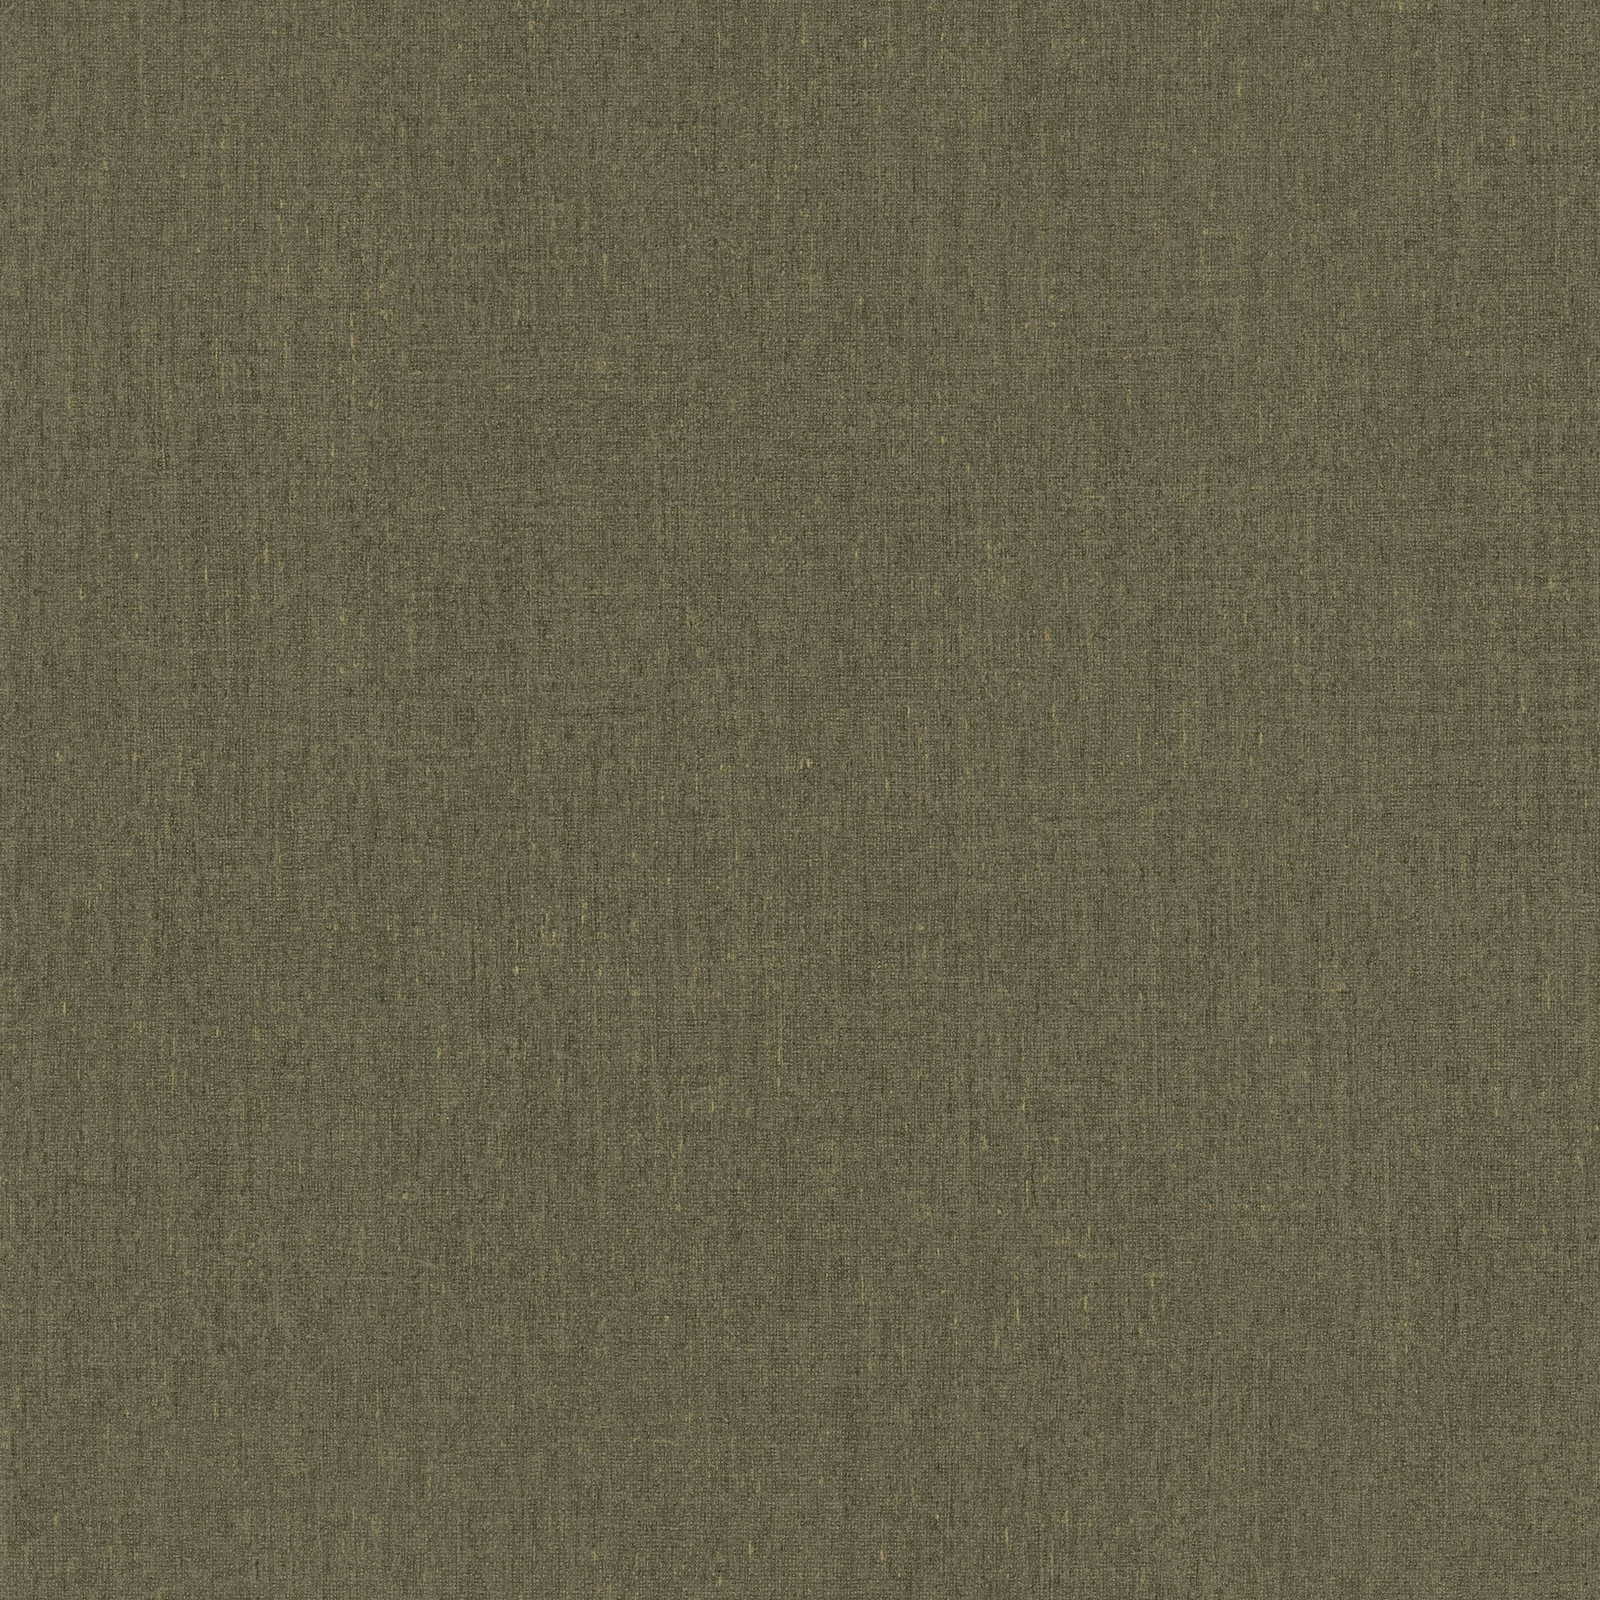 wallpaper light brown and olive mottled, with structure detail - brown
